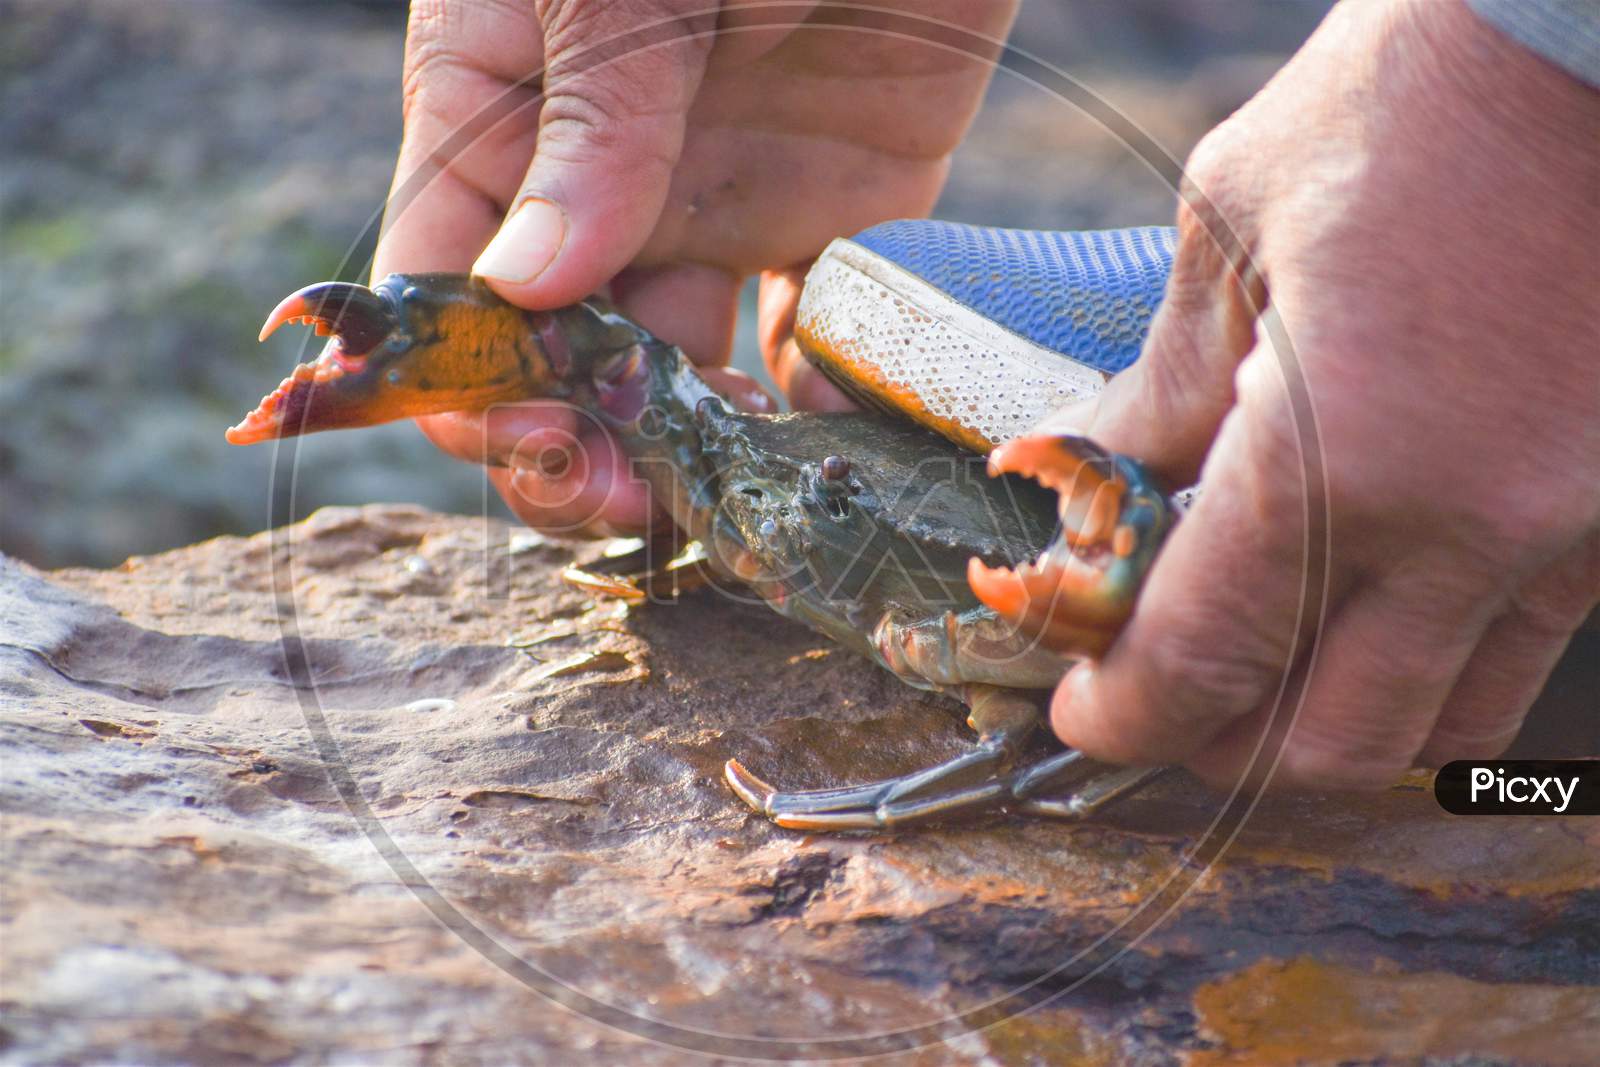 Stamping Crab With Foot And Catching Its Dactyl Claw With His Hands On Ground